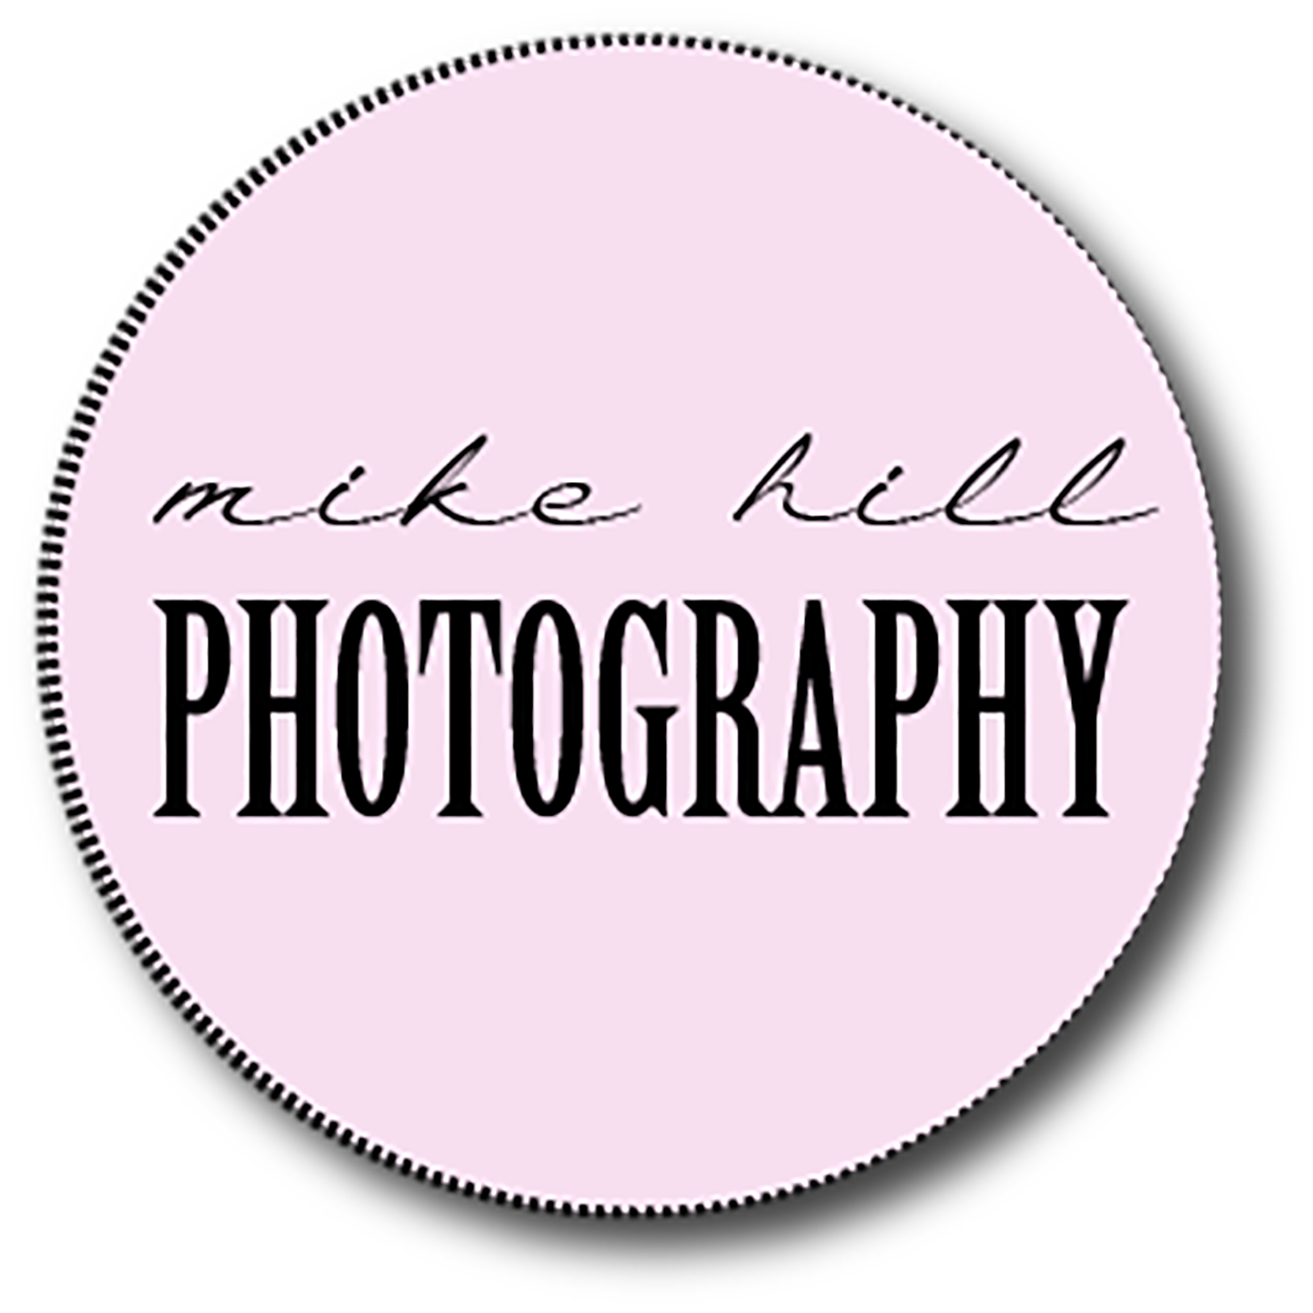 Mike Hill Photography ~ Personalised and empowering boudoir photography from our private boutique studio in Heywood, Wiltshire.